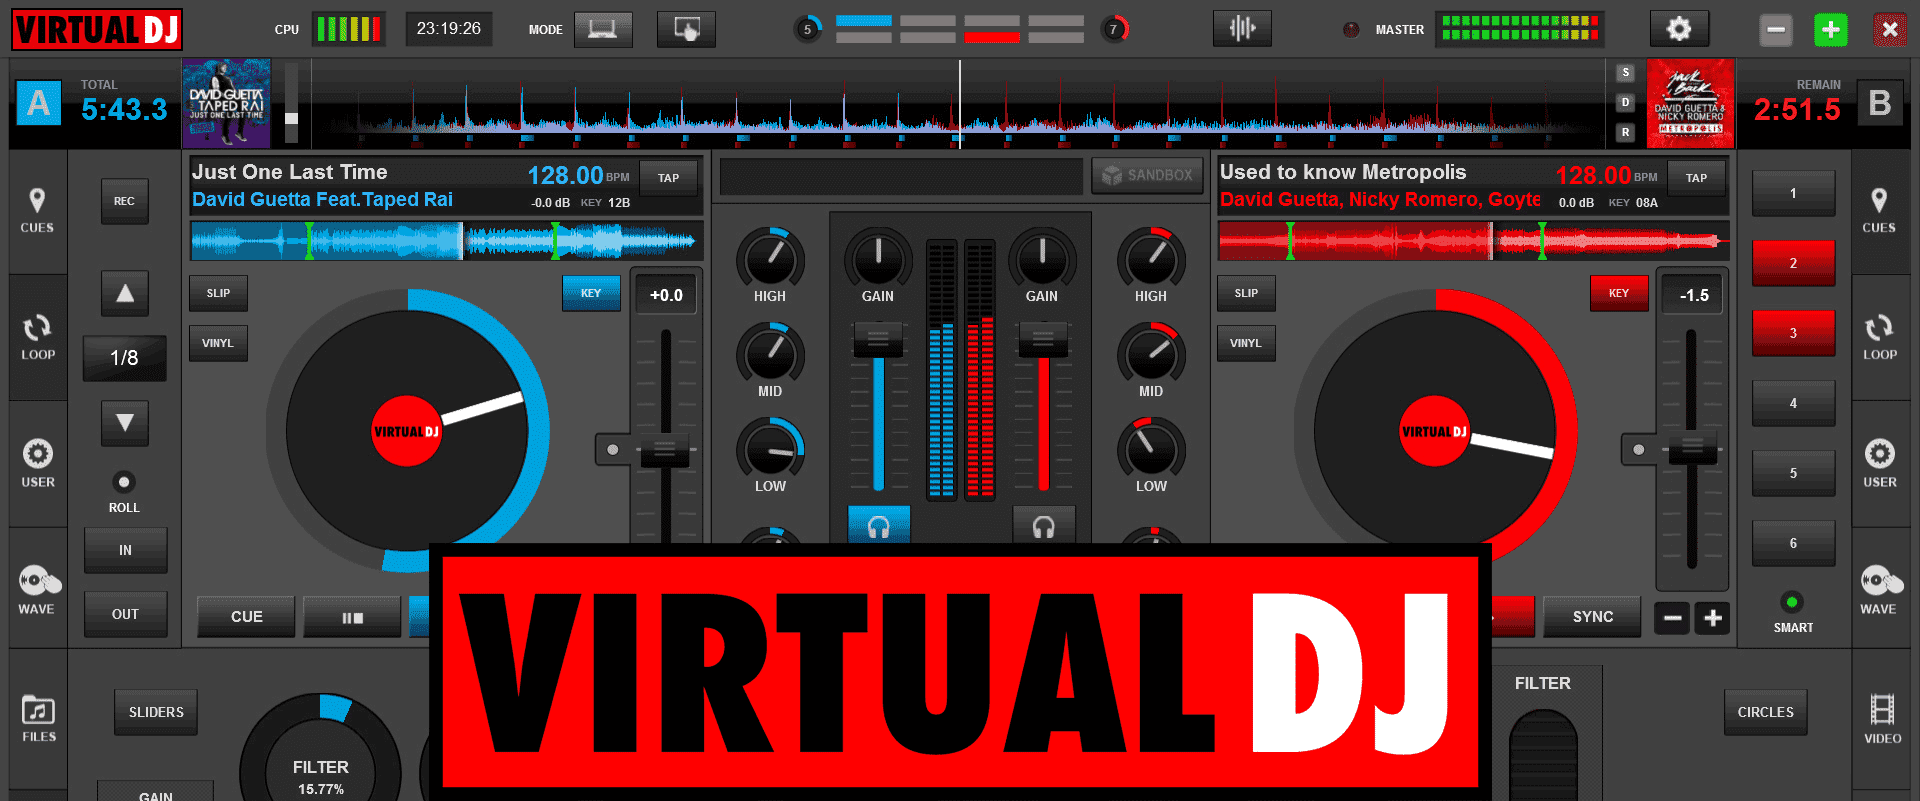 Differences Between Virtual DJ and Traktor Apps